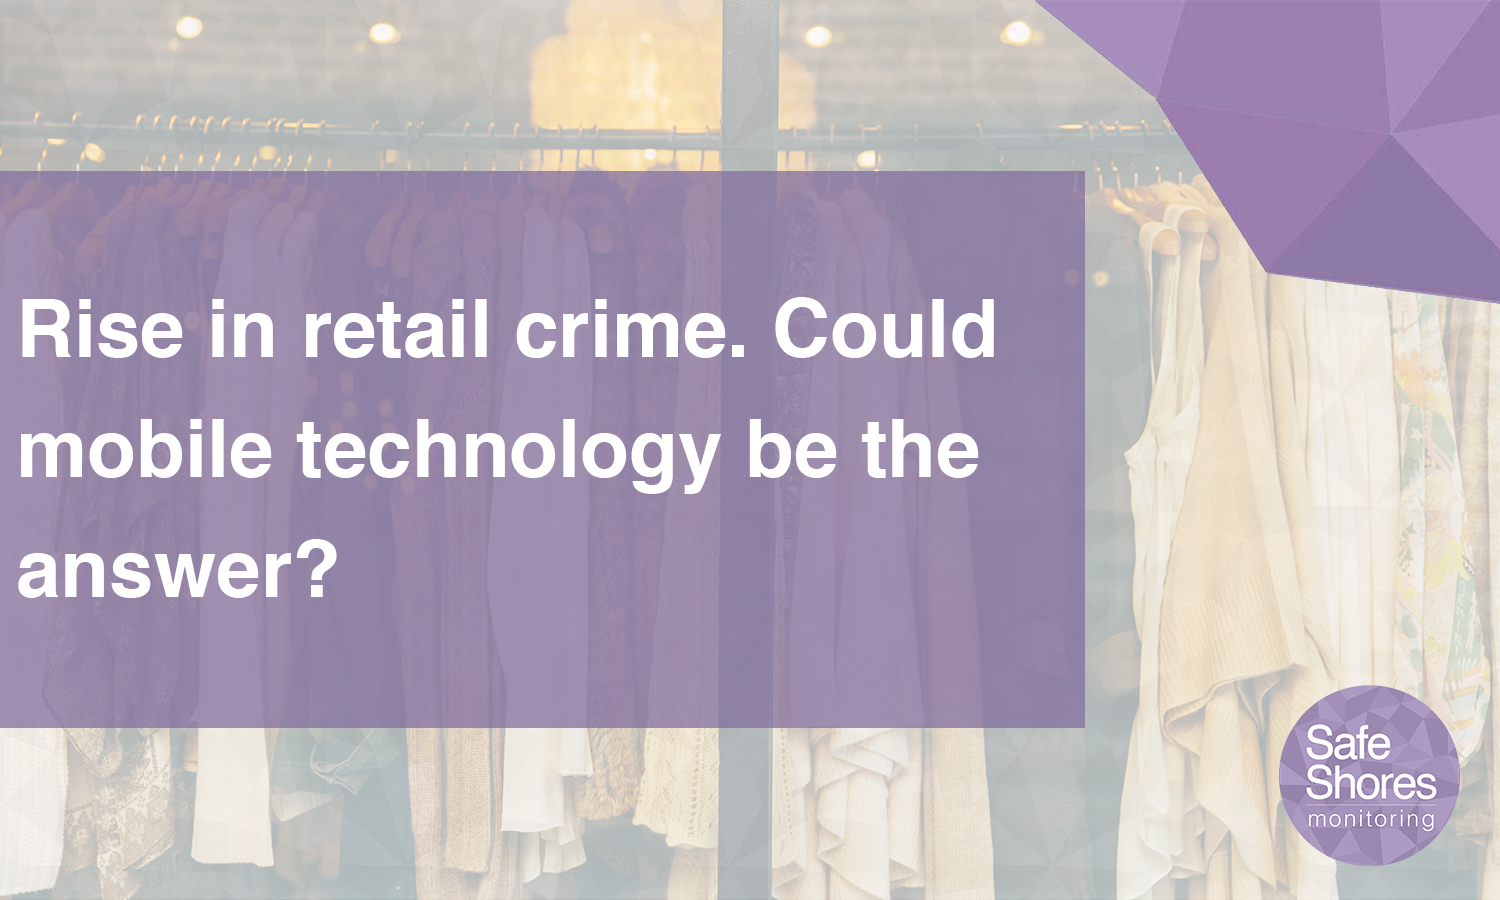 Rising retail crime: mobile monitoring technology could be the answer